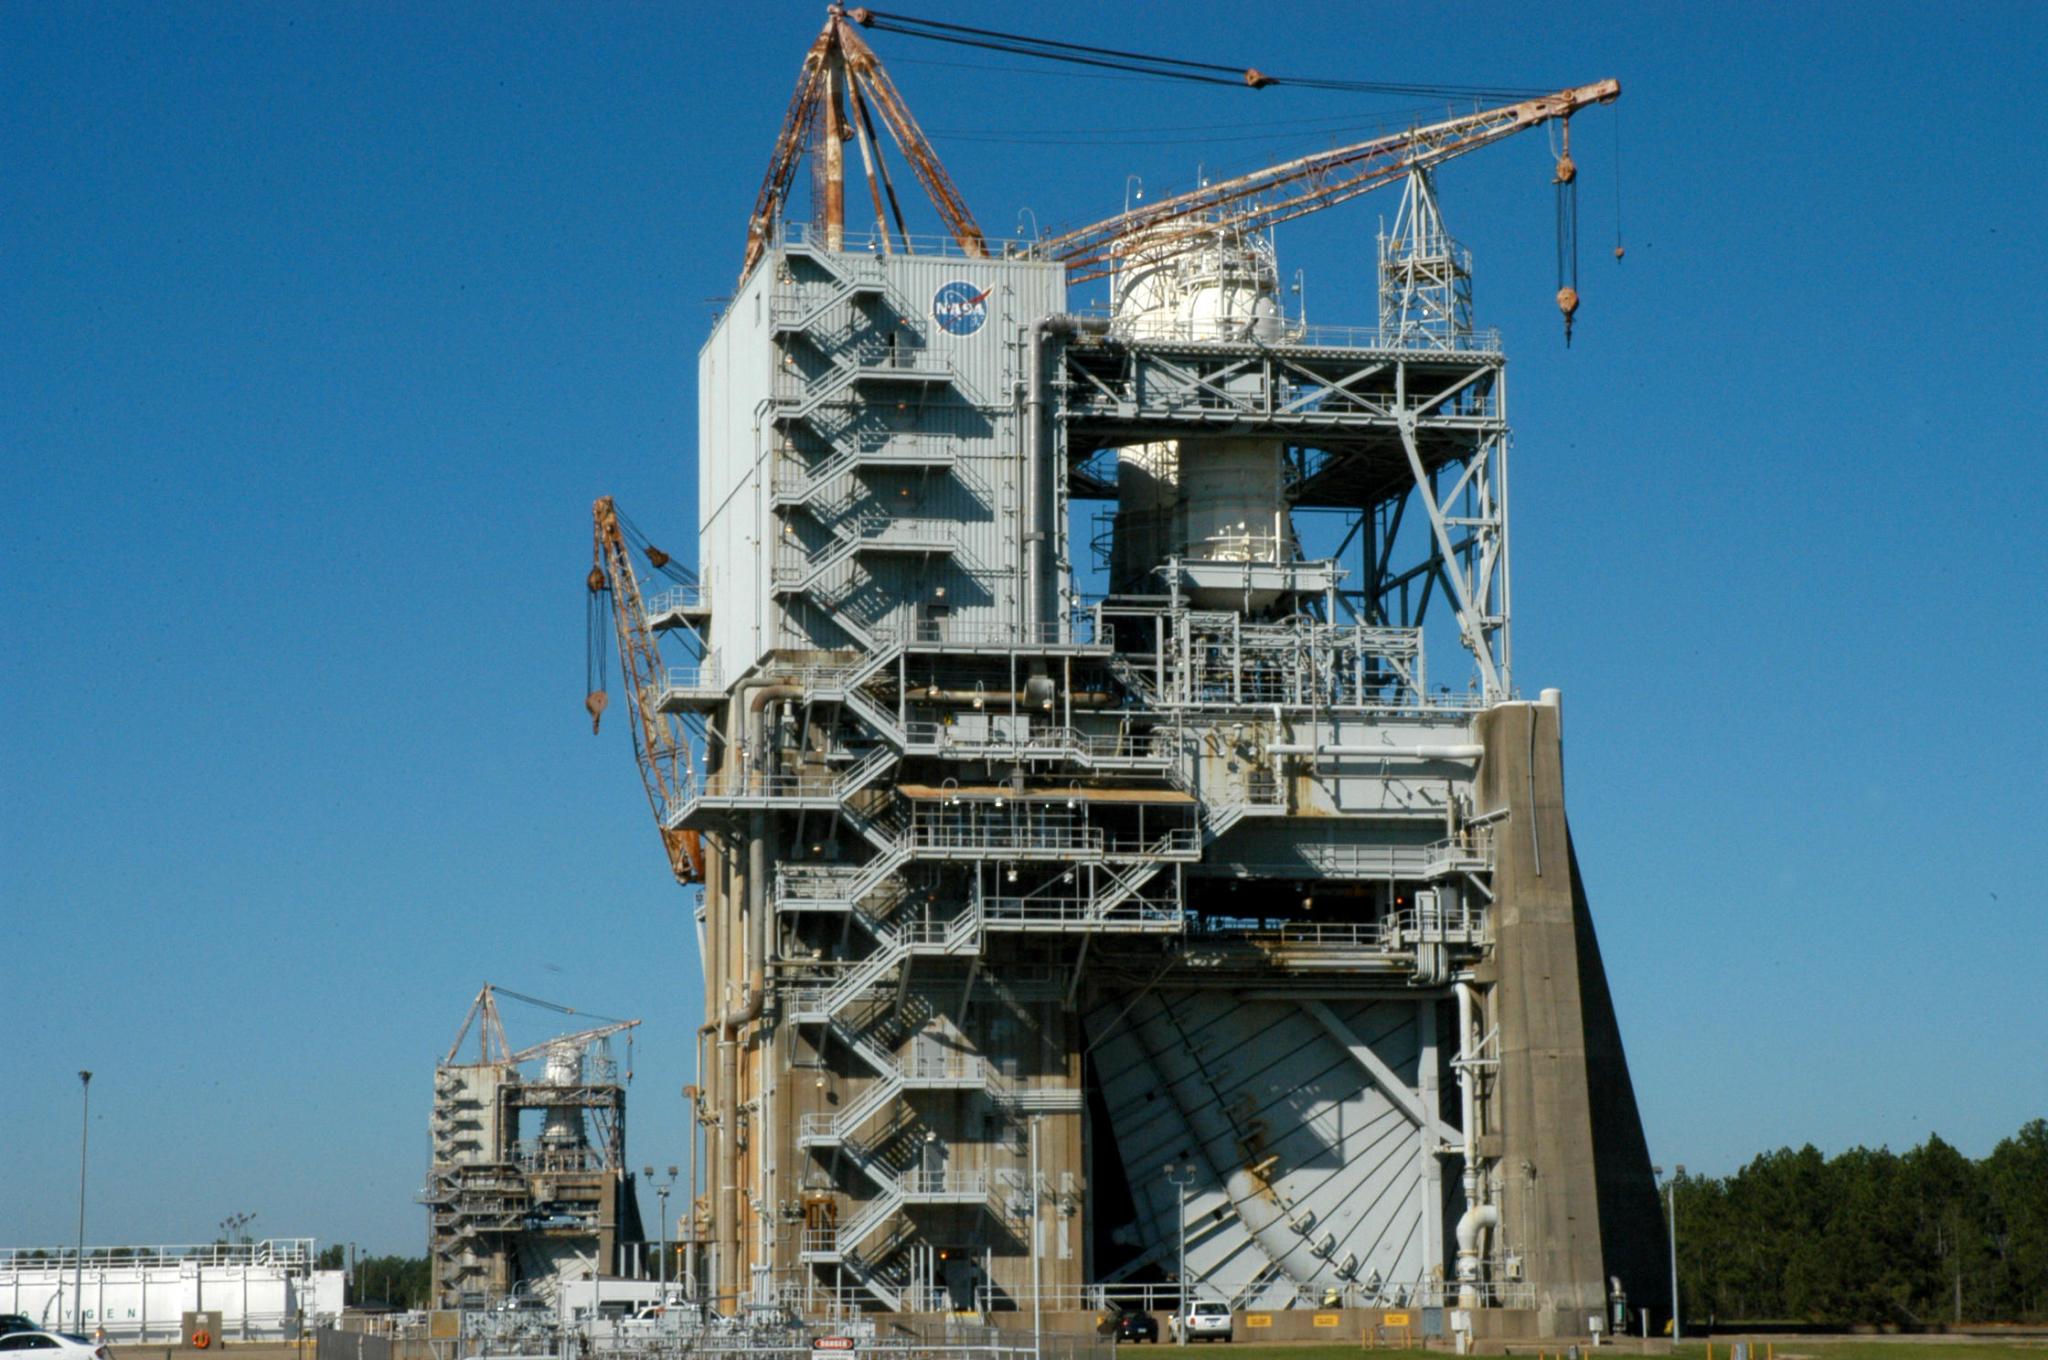 A-2 Test Stand